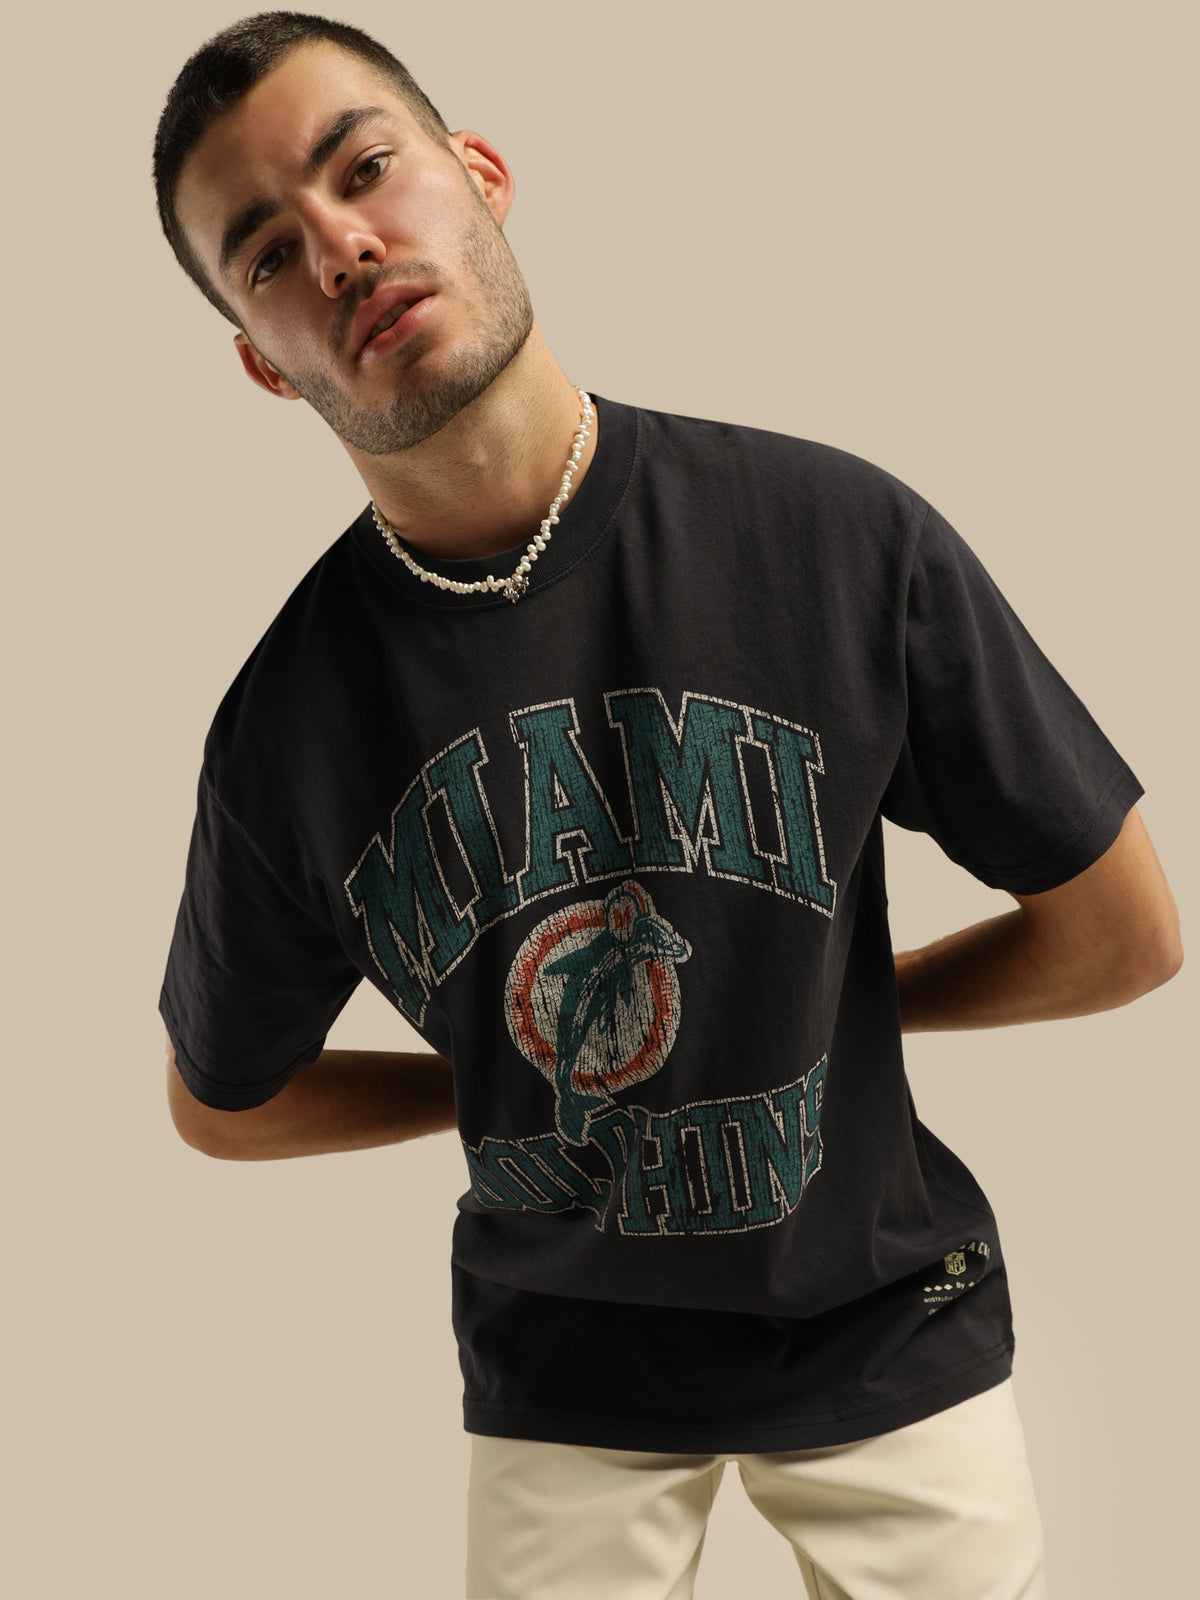 Miami Dolphins T-Shirt in Black